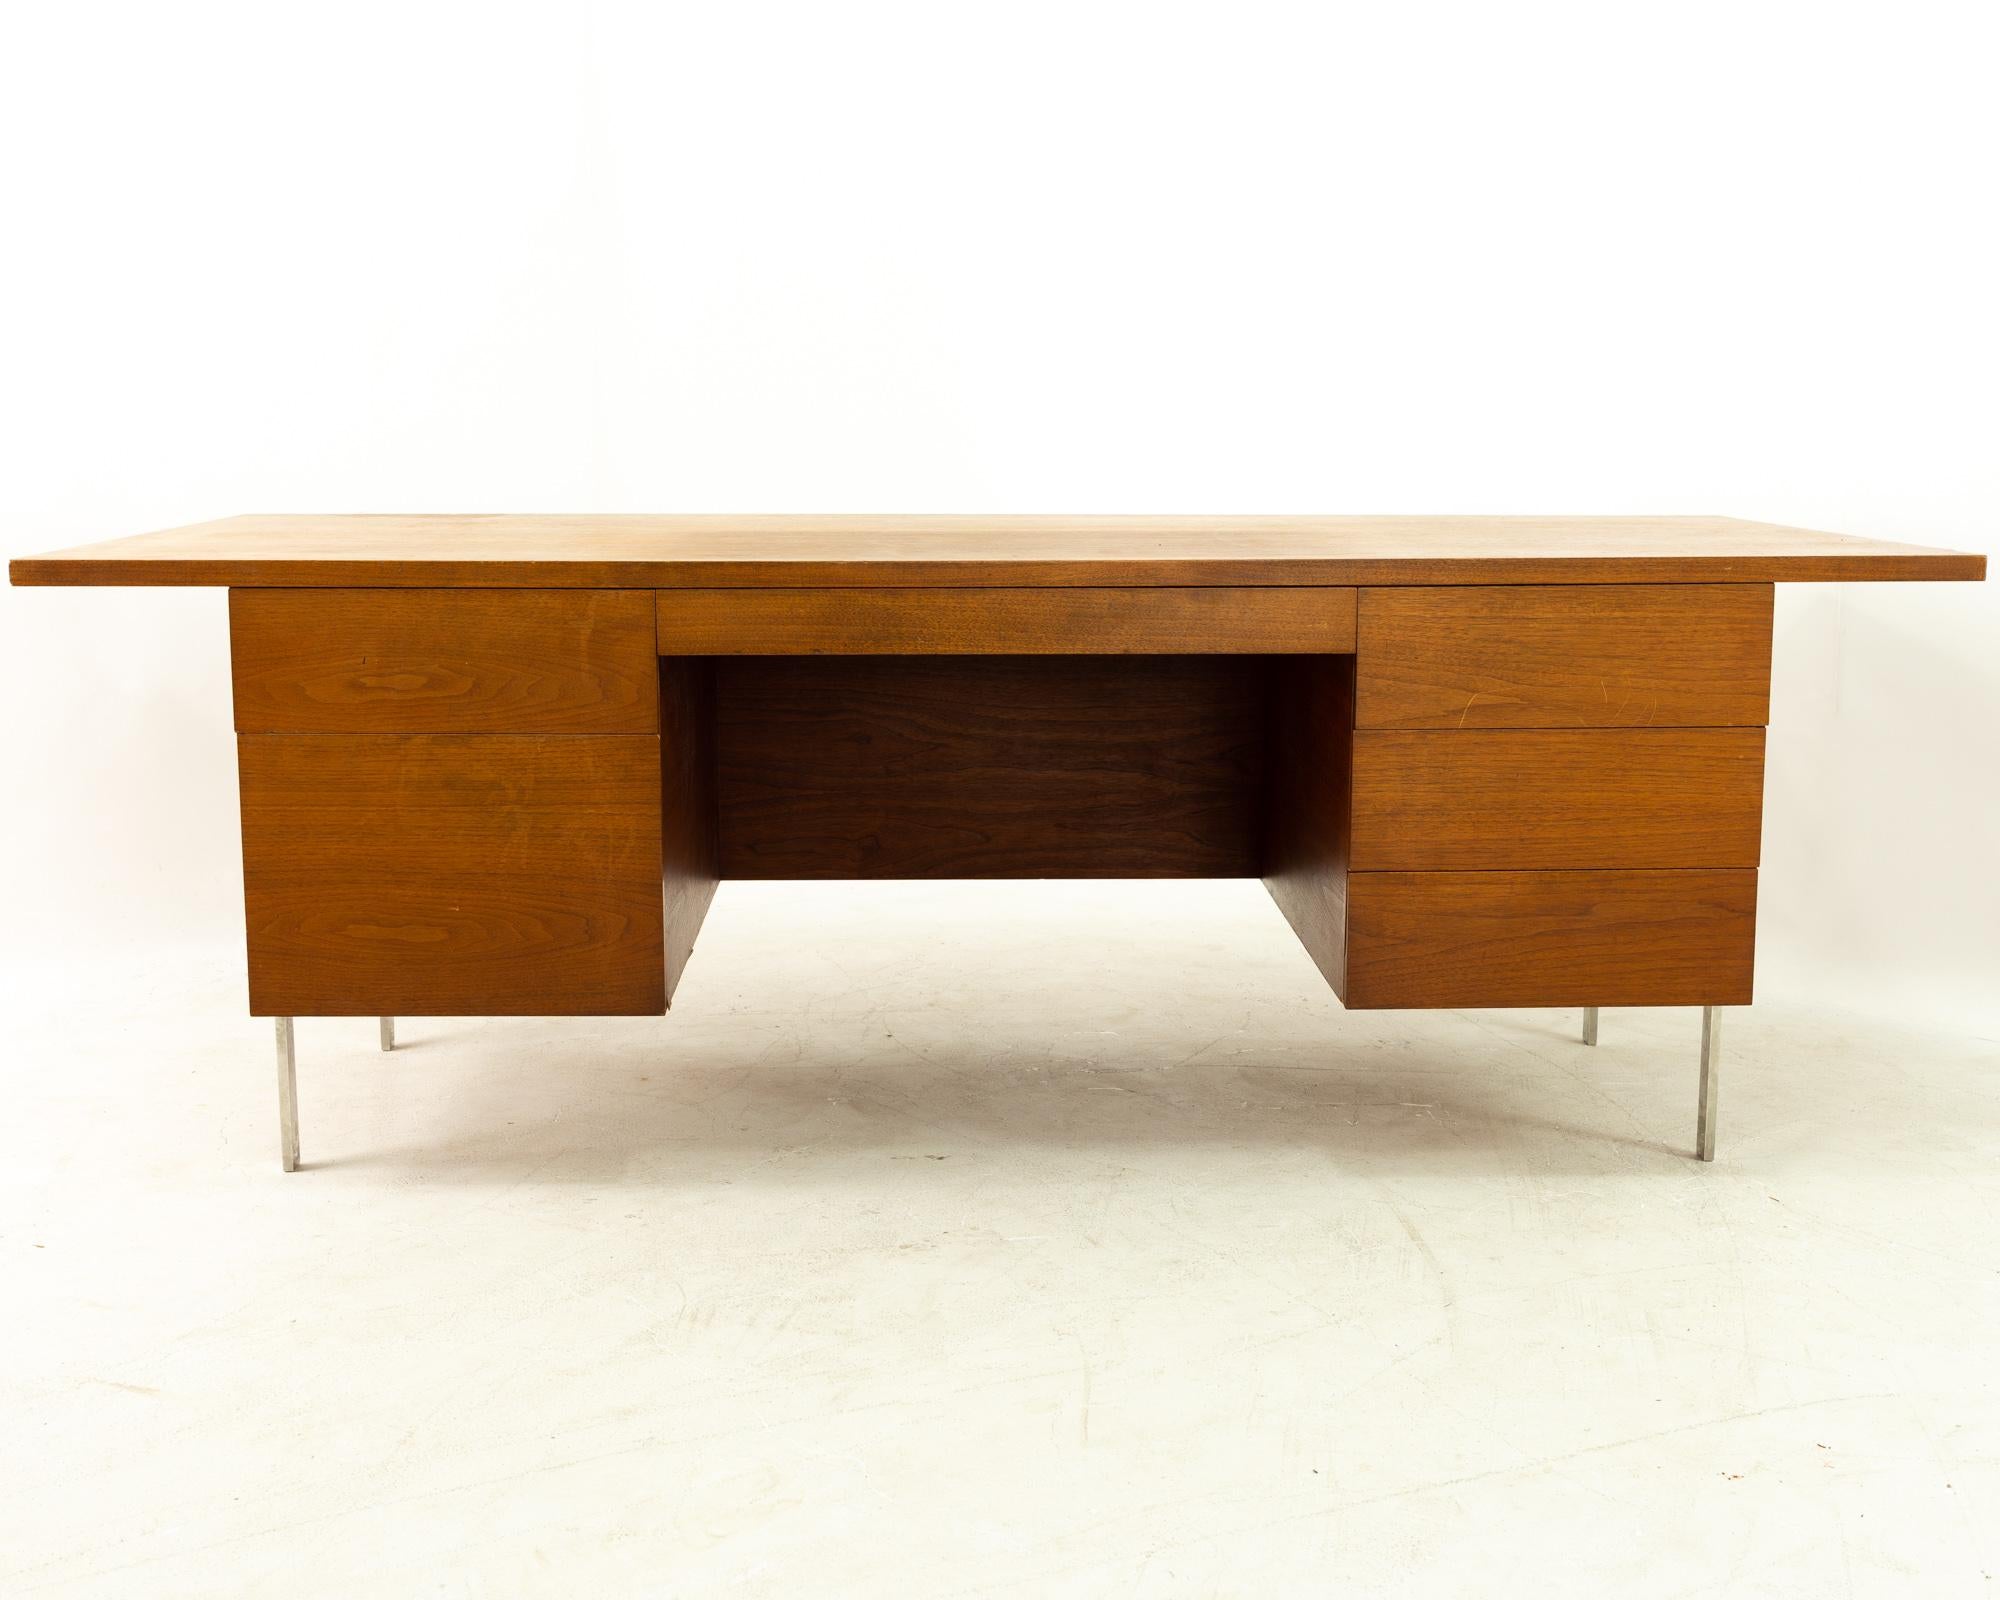 Harvey Probber midcentury walnut and chrome executive desk 
Measures: 84 wide x 36 deep x 28.5 high
See below for 5 ways to save!
Free restoration: When you purchase a piece we carefully clean and prepare it for shipping. If during re-inspection